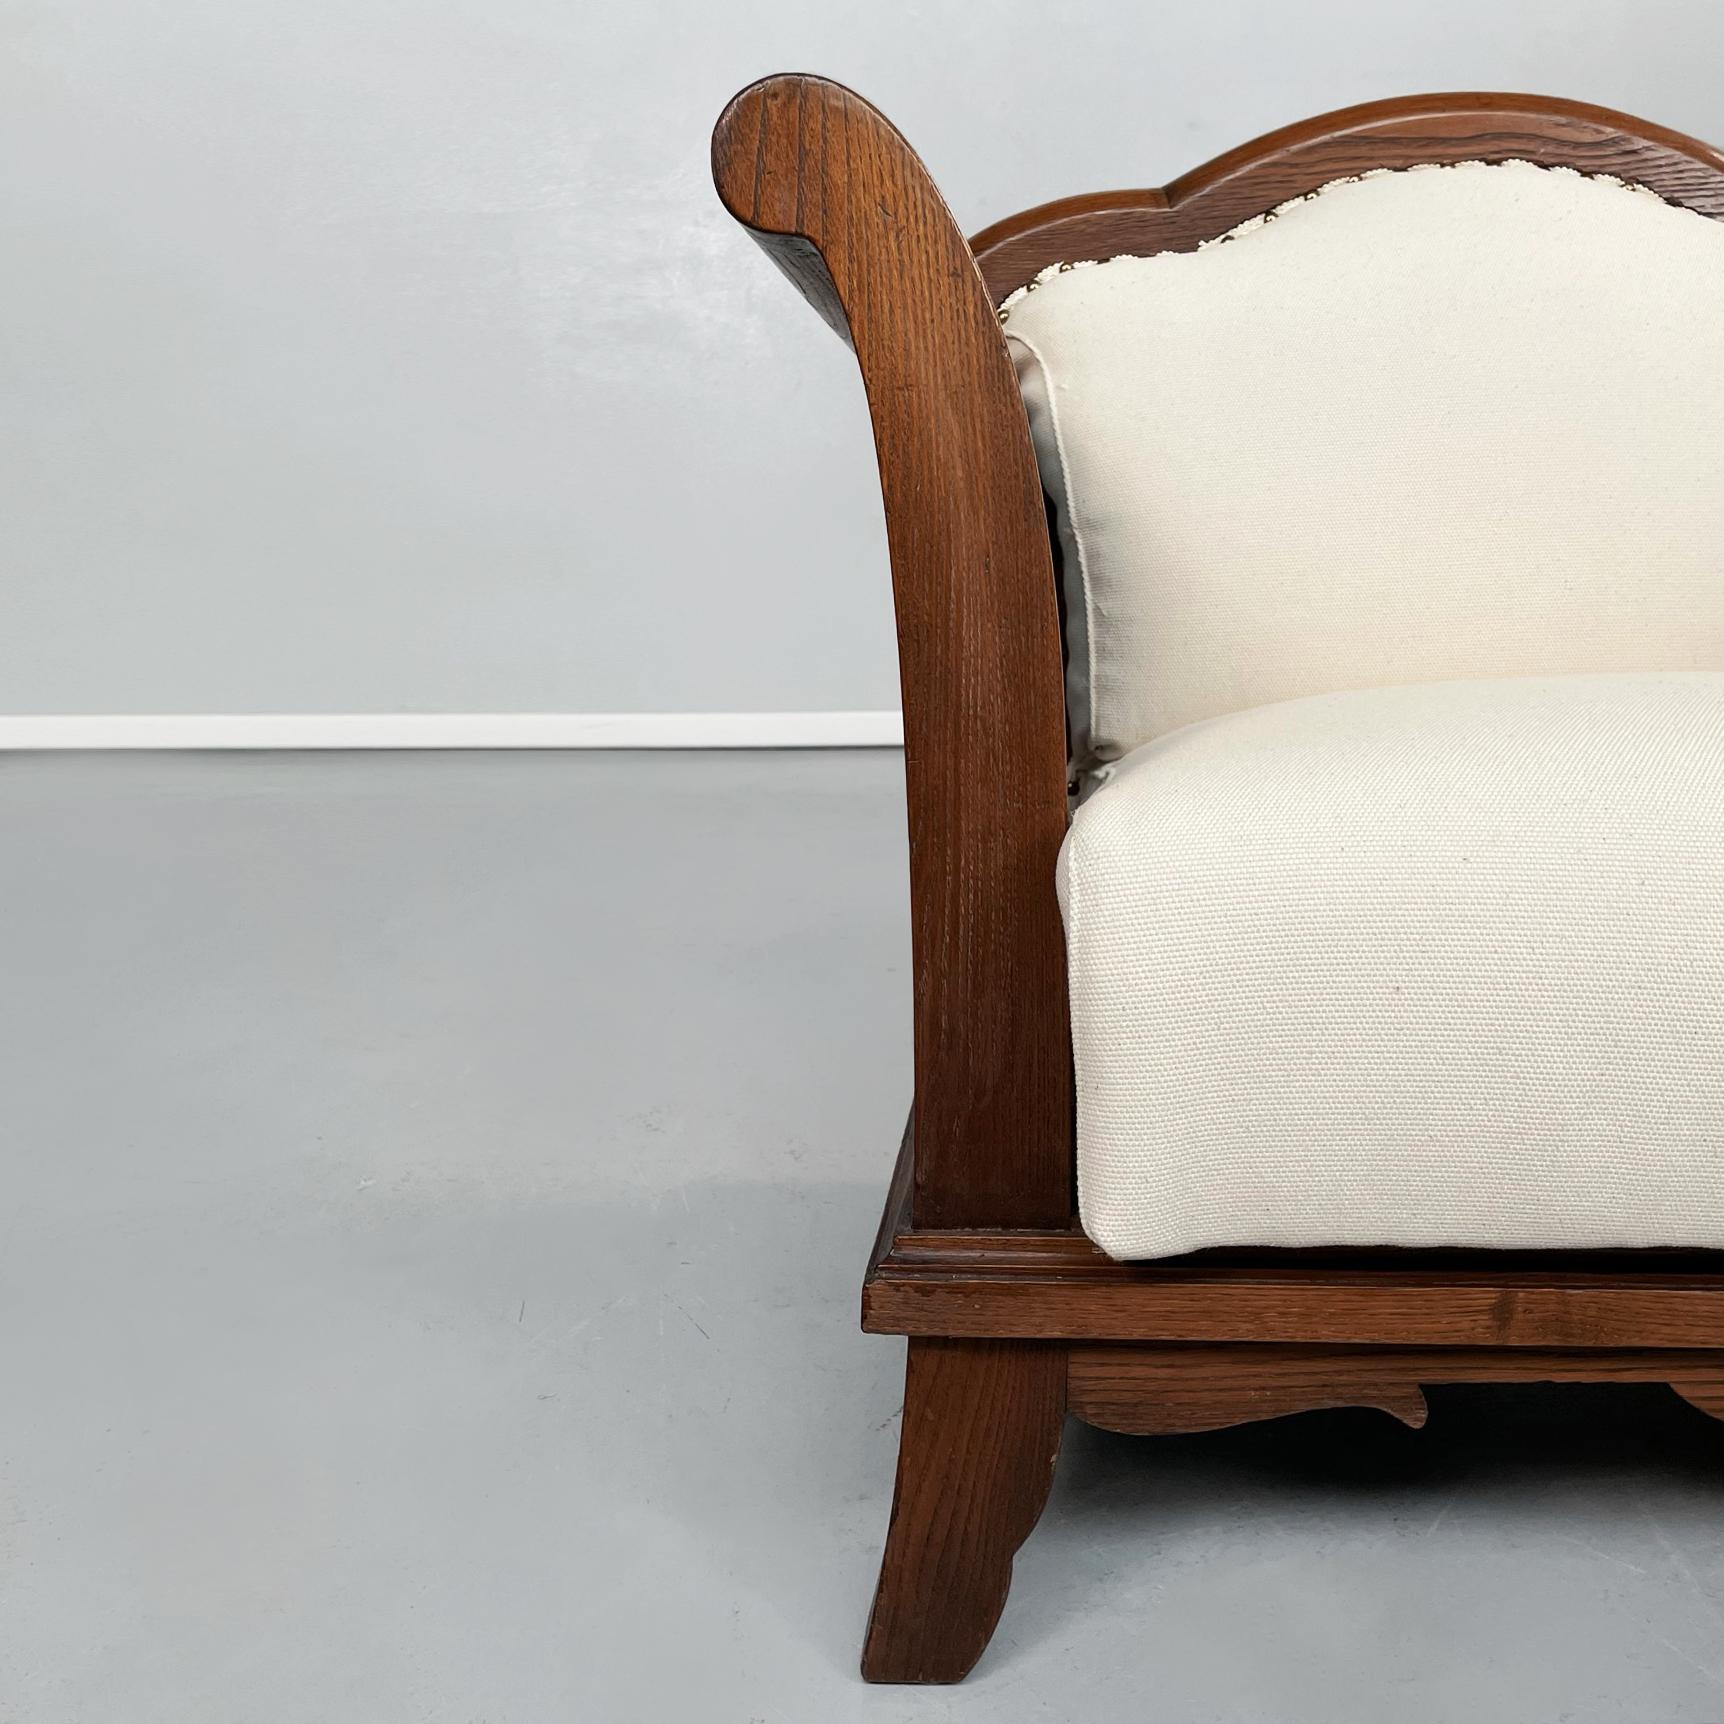 Italian Modern Wooden Armchairs with White Fabric, 1940s For Sale 2